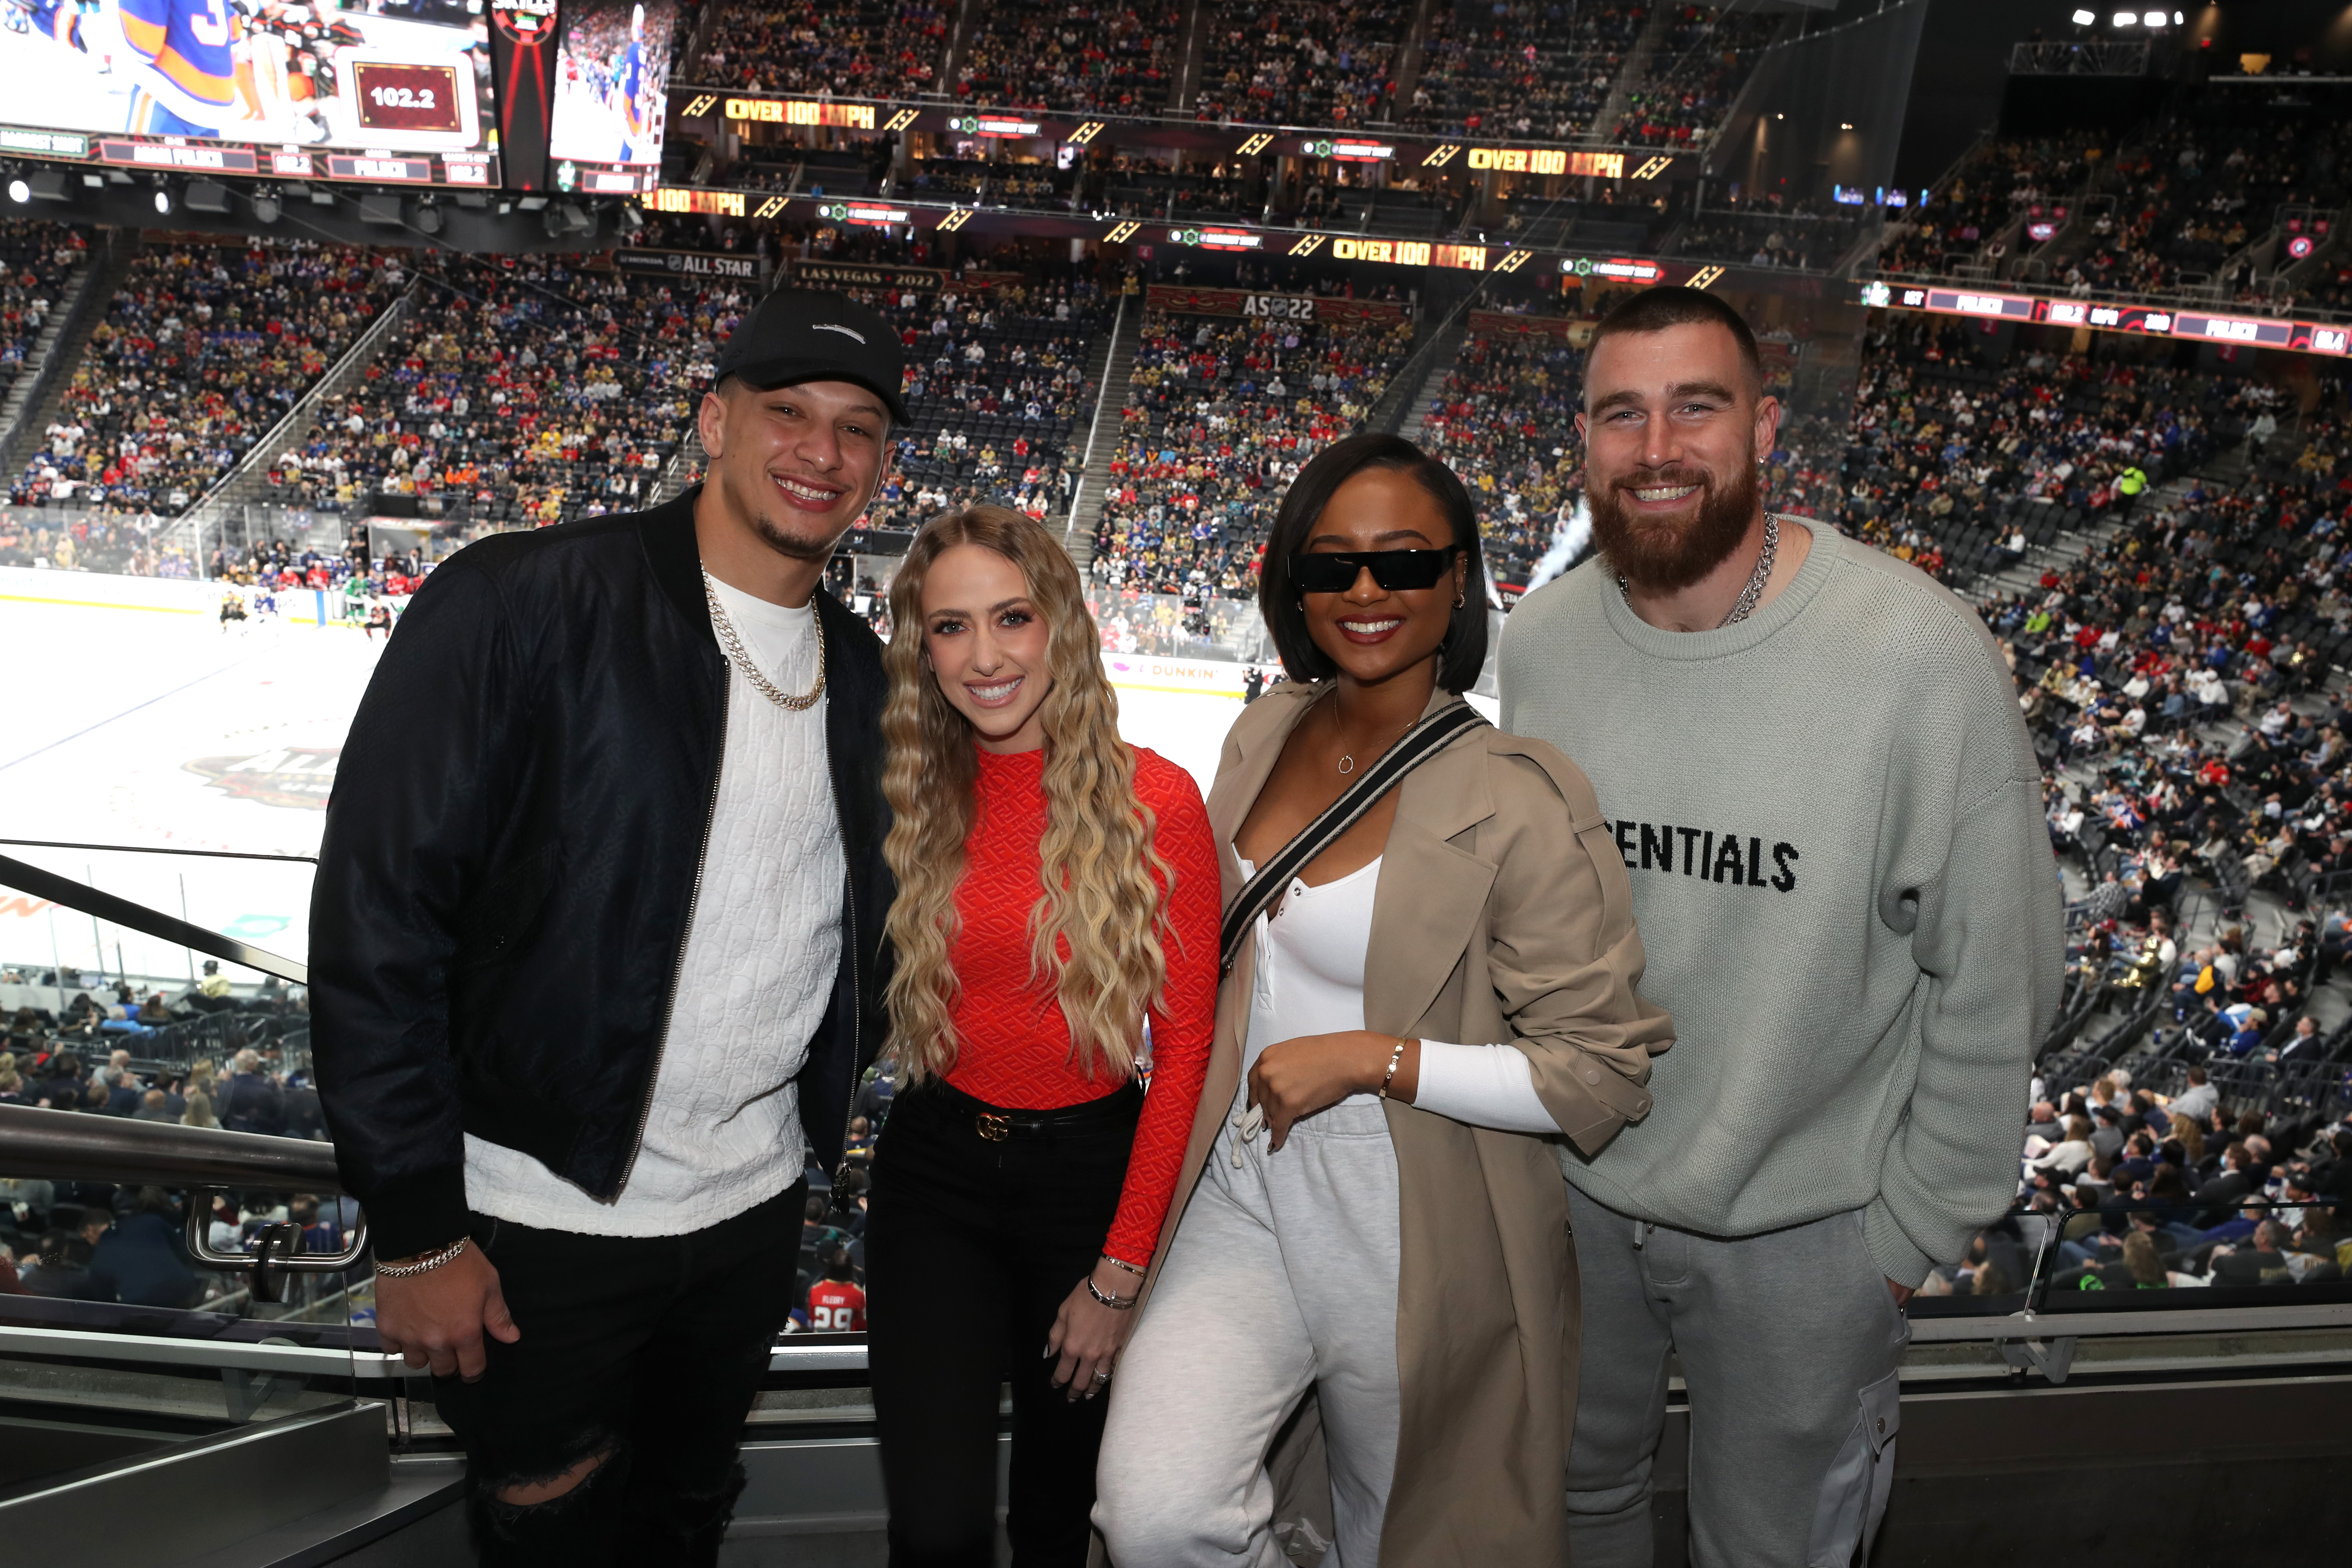 Patrick Mahomes, Brittany Matthews, Kayla Nicole and Travis Kelce posing for a photo